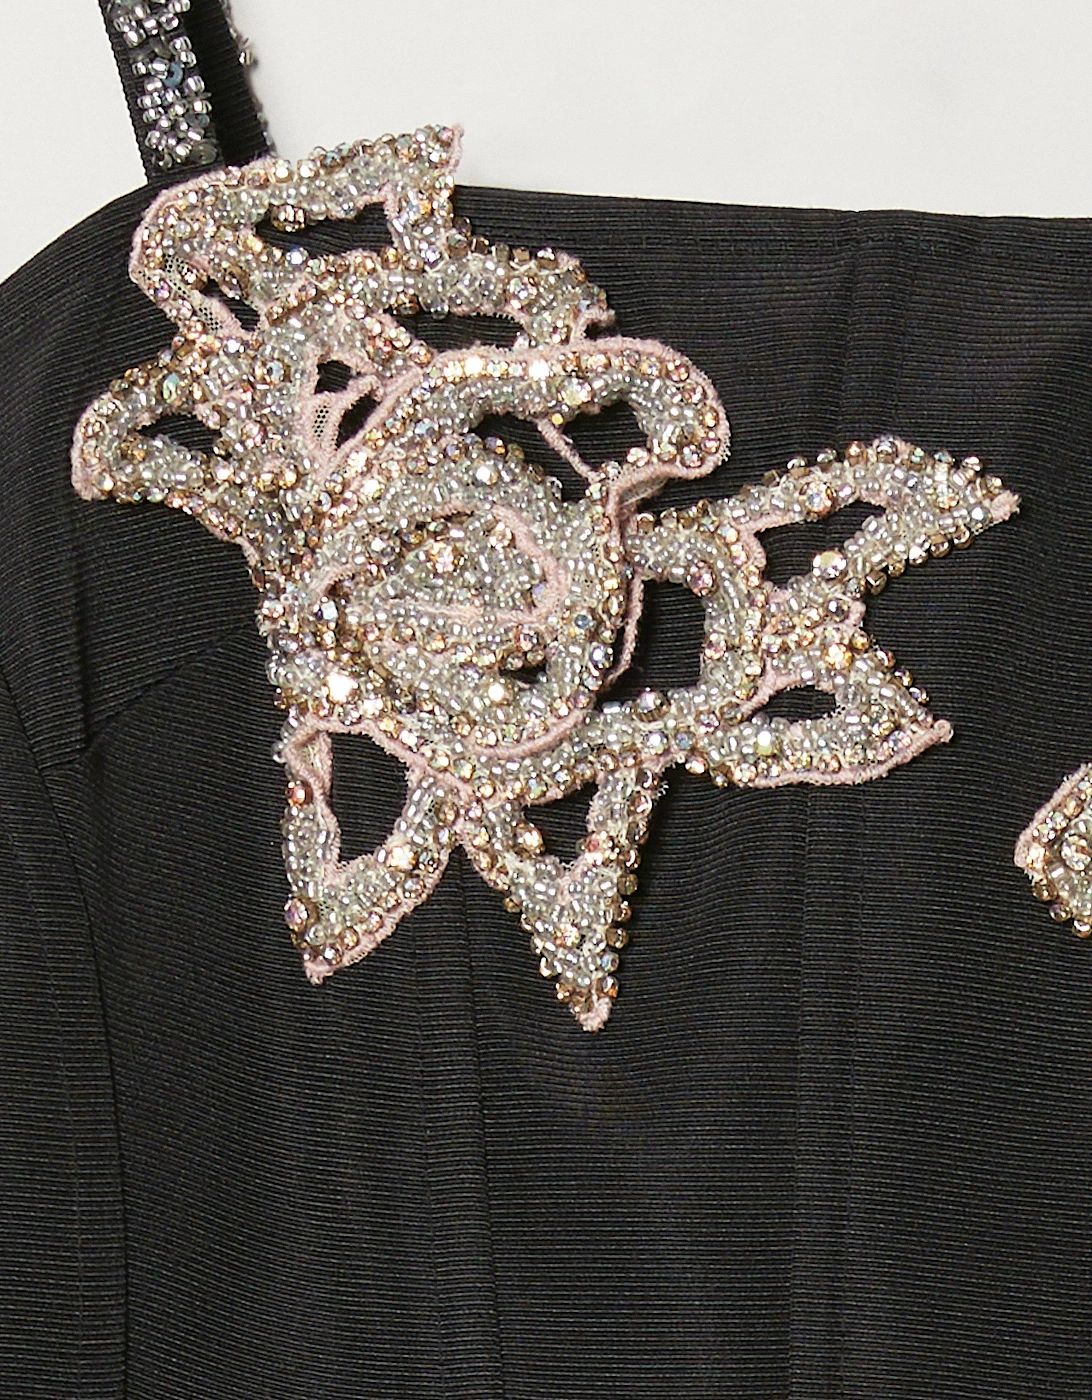 Jumpsuit With Crystals